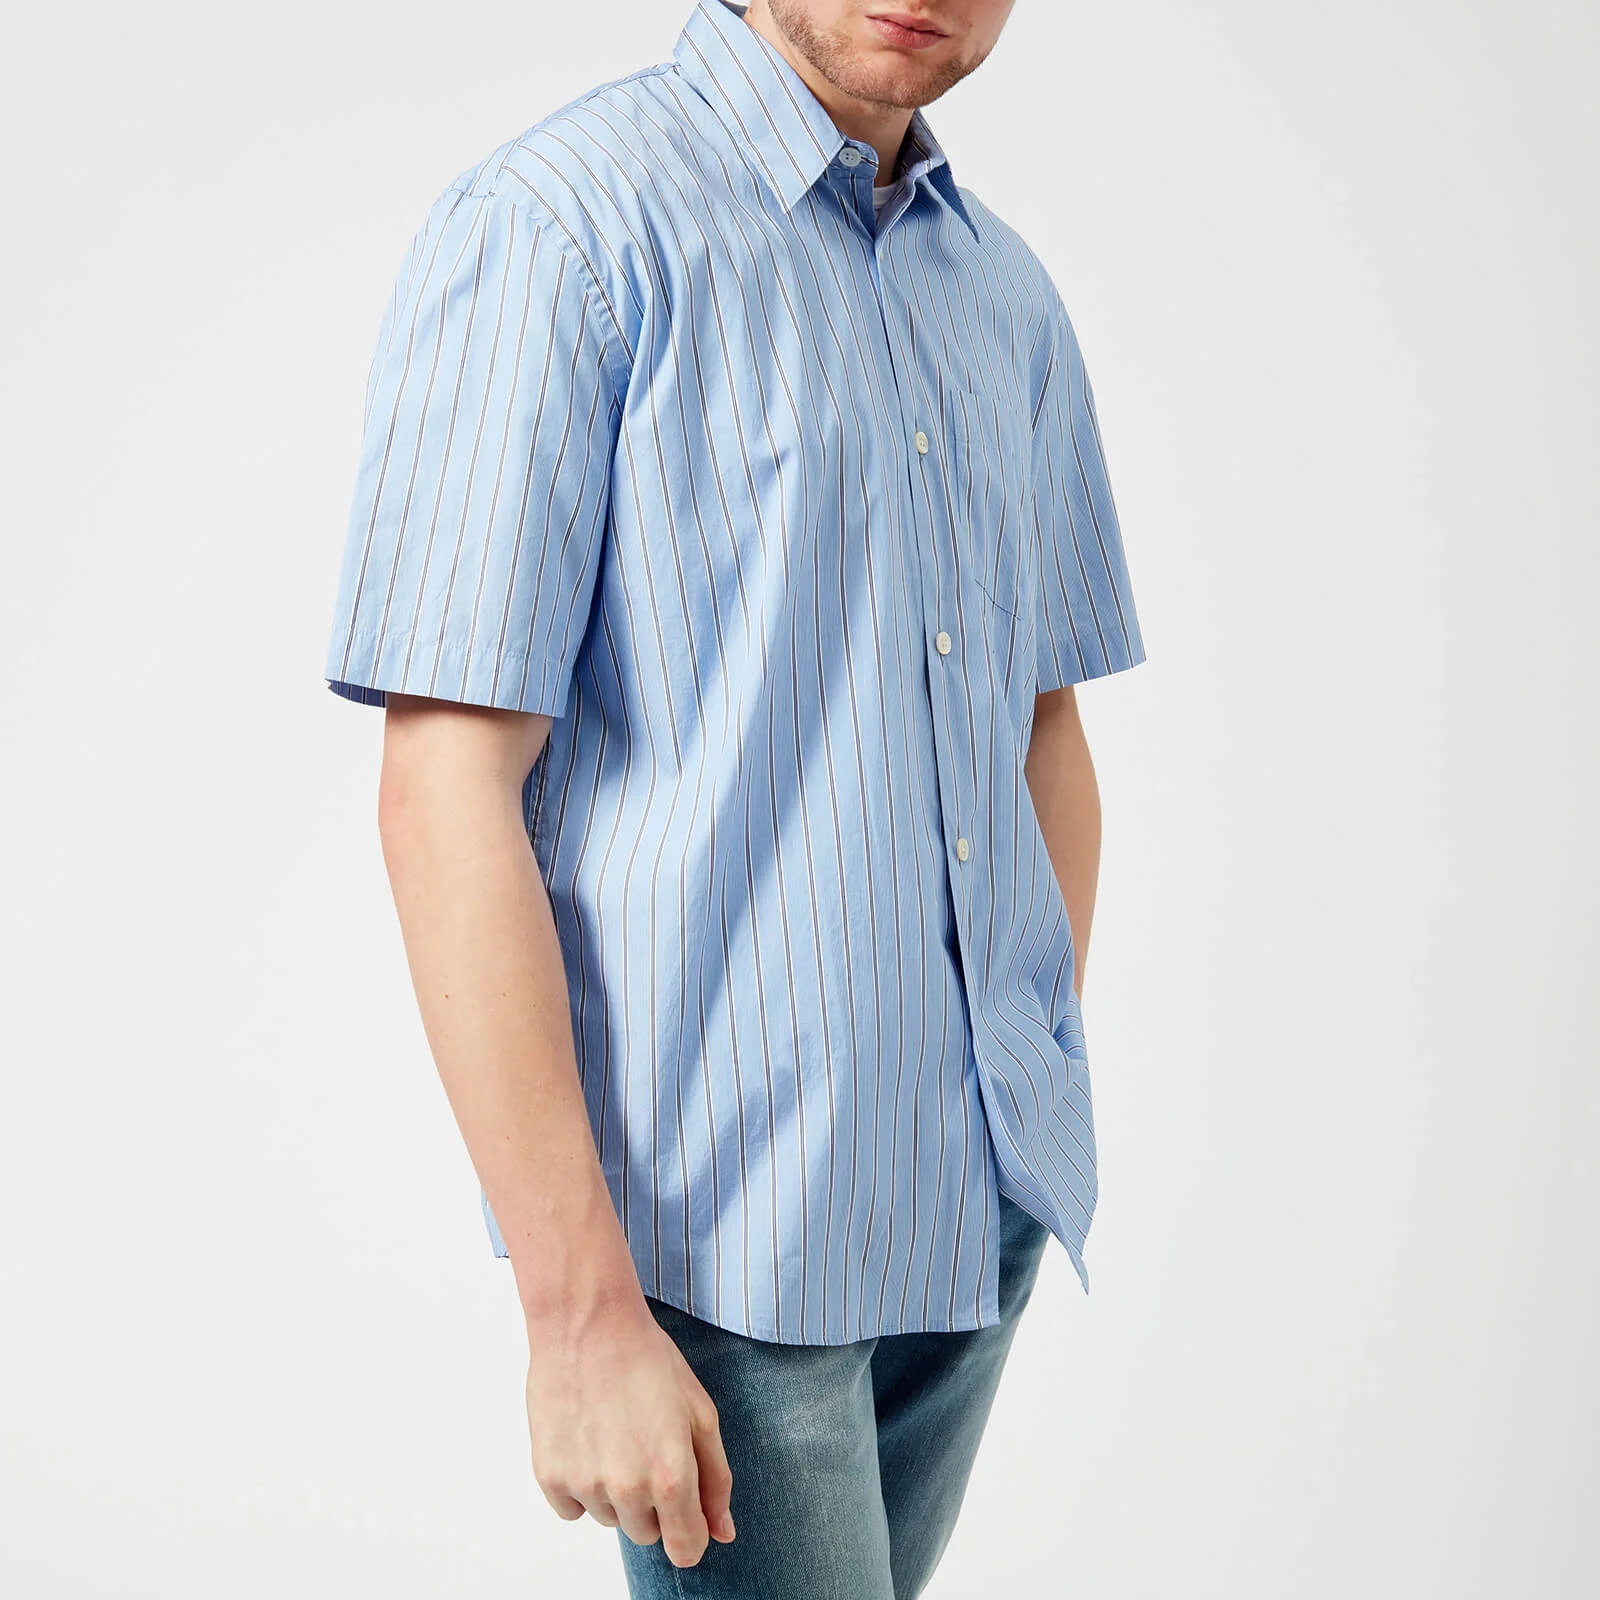 Our Legacy Men's Initial Short Sleeve Shirt - Navy Stripe Image 1